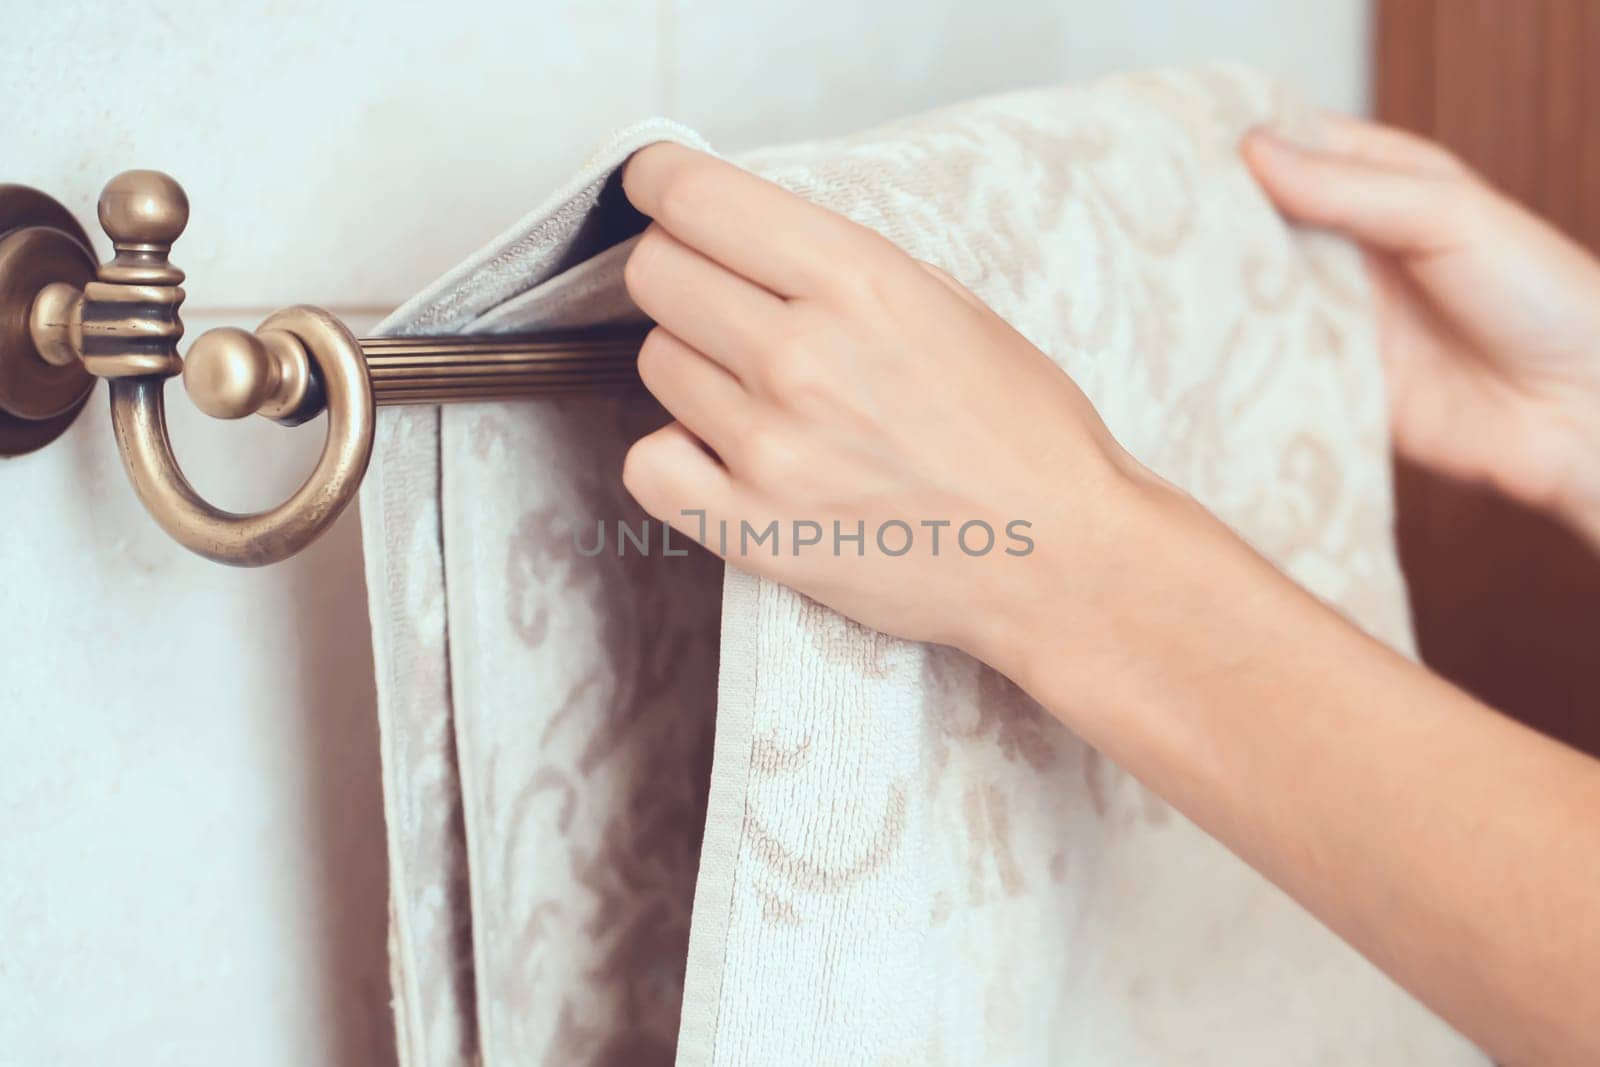 Female hands hang a fresh clean towel on a towel holder made in vintage style in the bathroom.